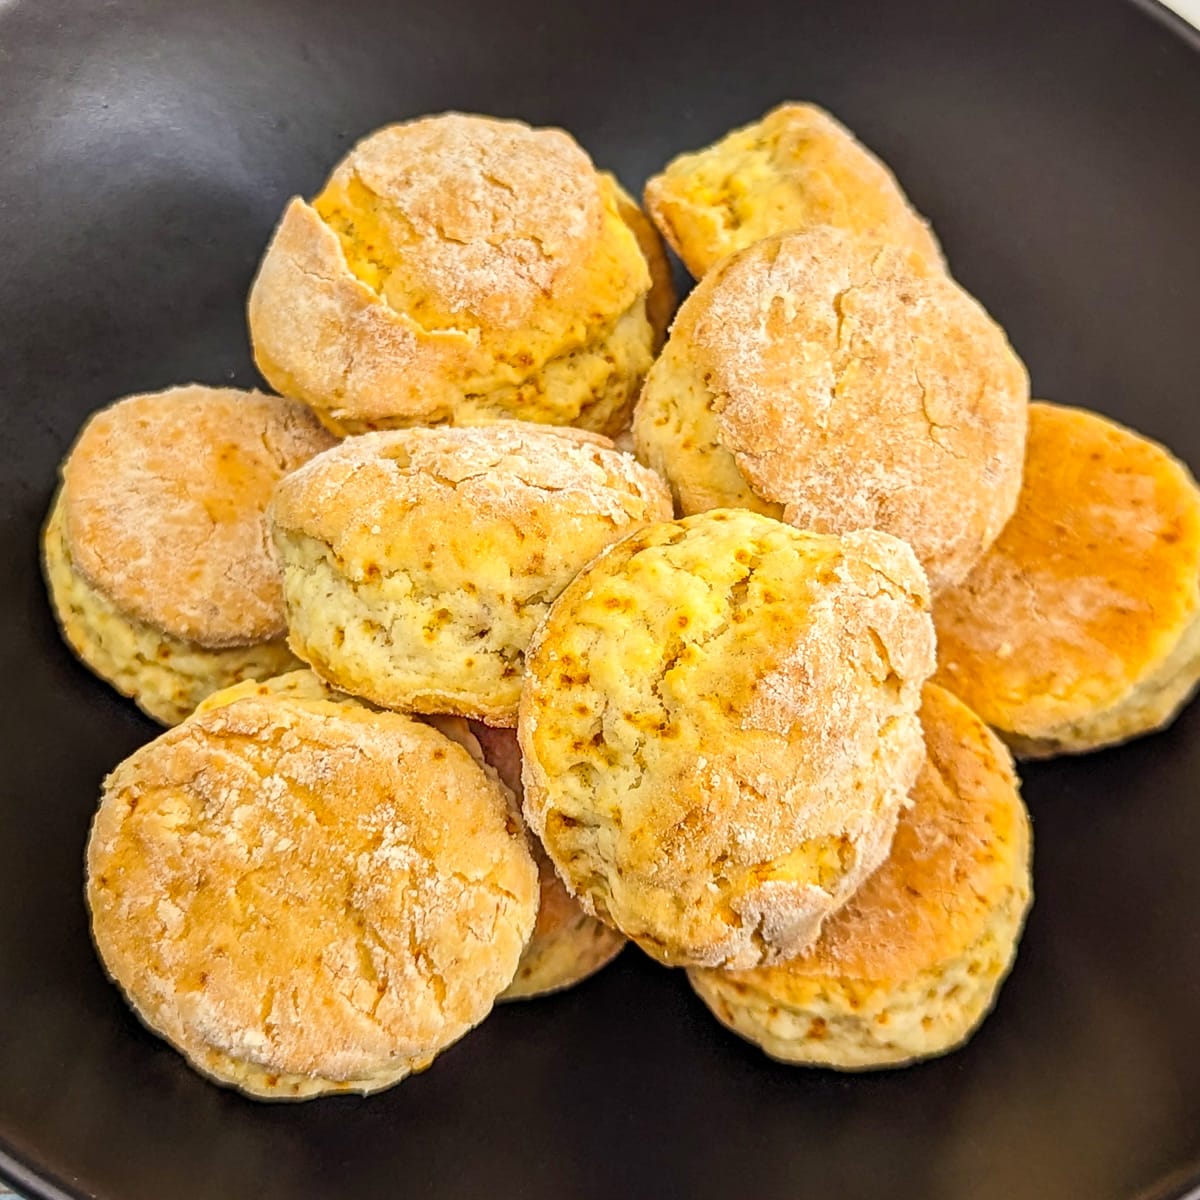 Black plate full with golden scones made from only 2 ingredients.